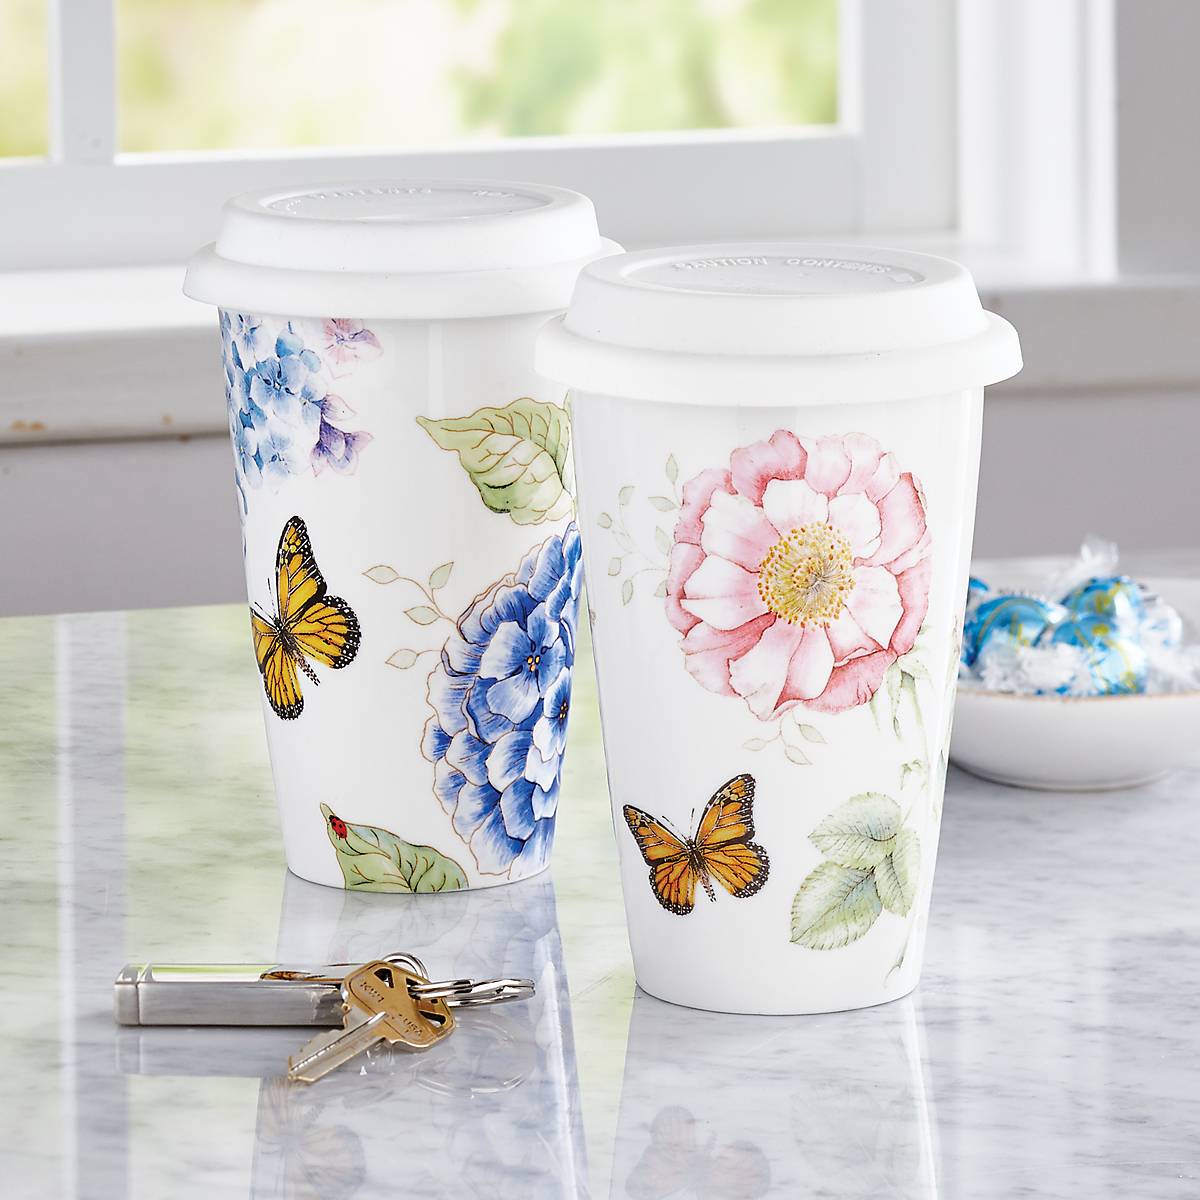 Insulated Travel Mugs with Lids